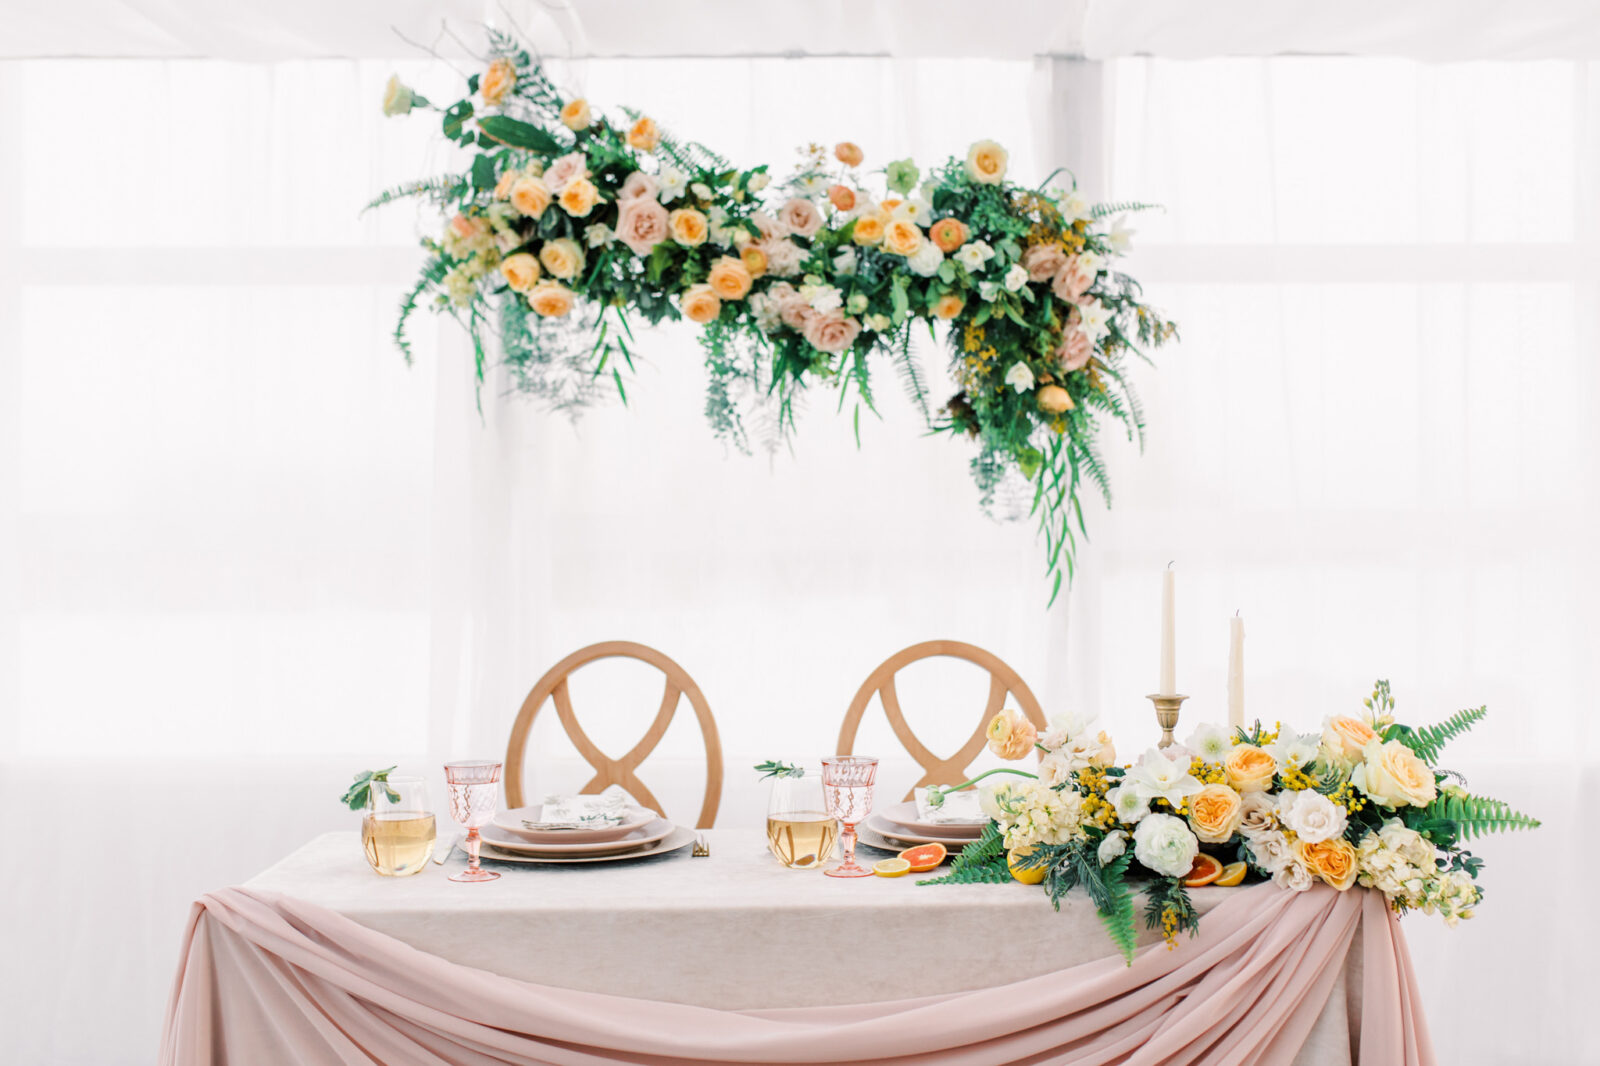 Sweetheart table design with yellow and peach spring inspired floral arrangements, custom pink glassware, plates, and stemware, designed by Changing Dreams to Reality